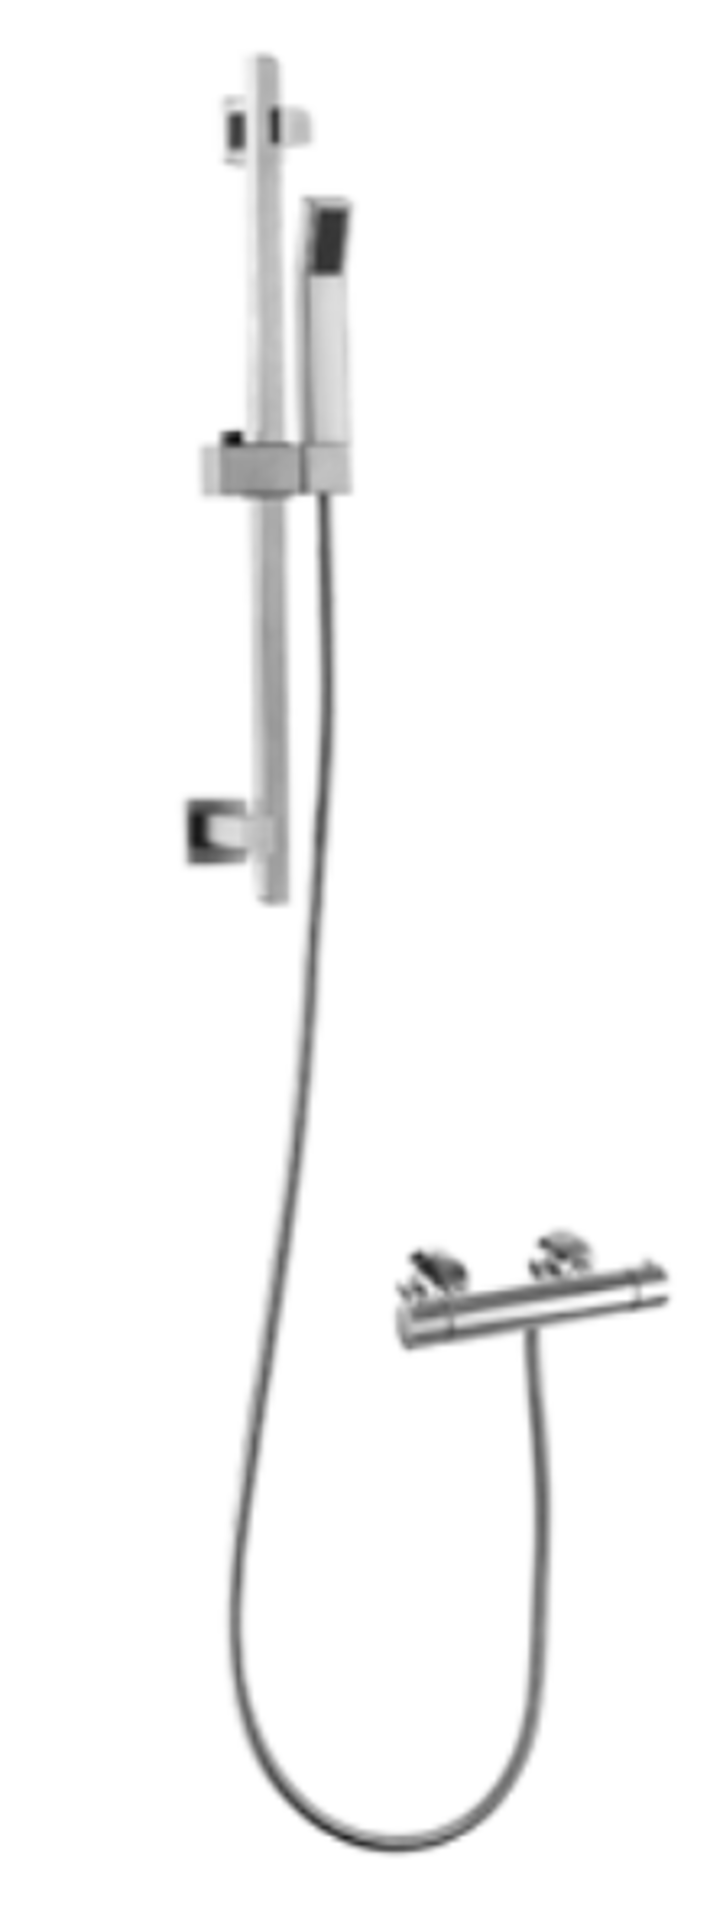 1 x Stonearth 'Metro' Stainless Thermostatic Shower Kit - Brand New & Boxed - RRP £495 - Ref: